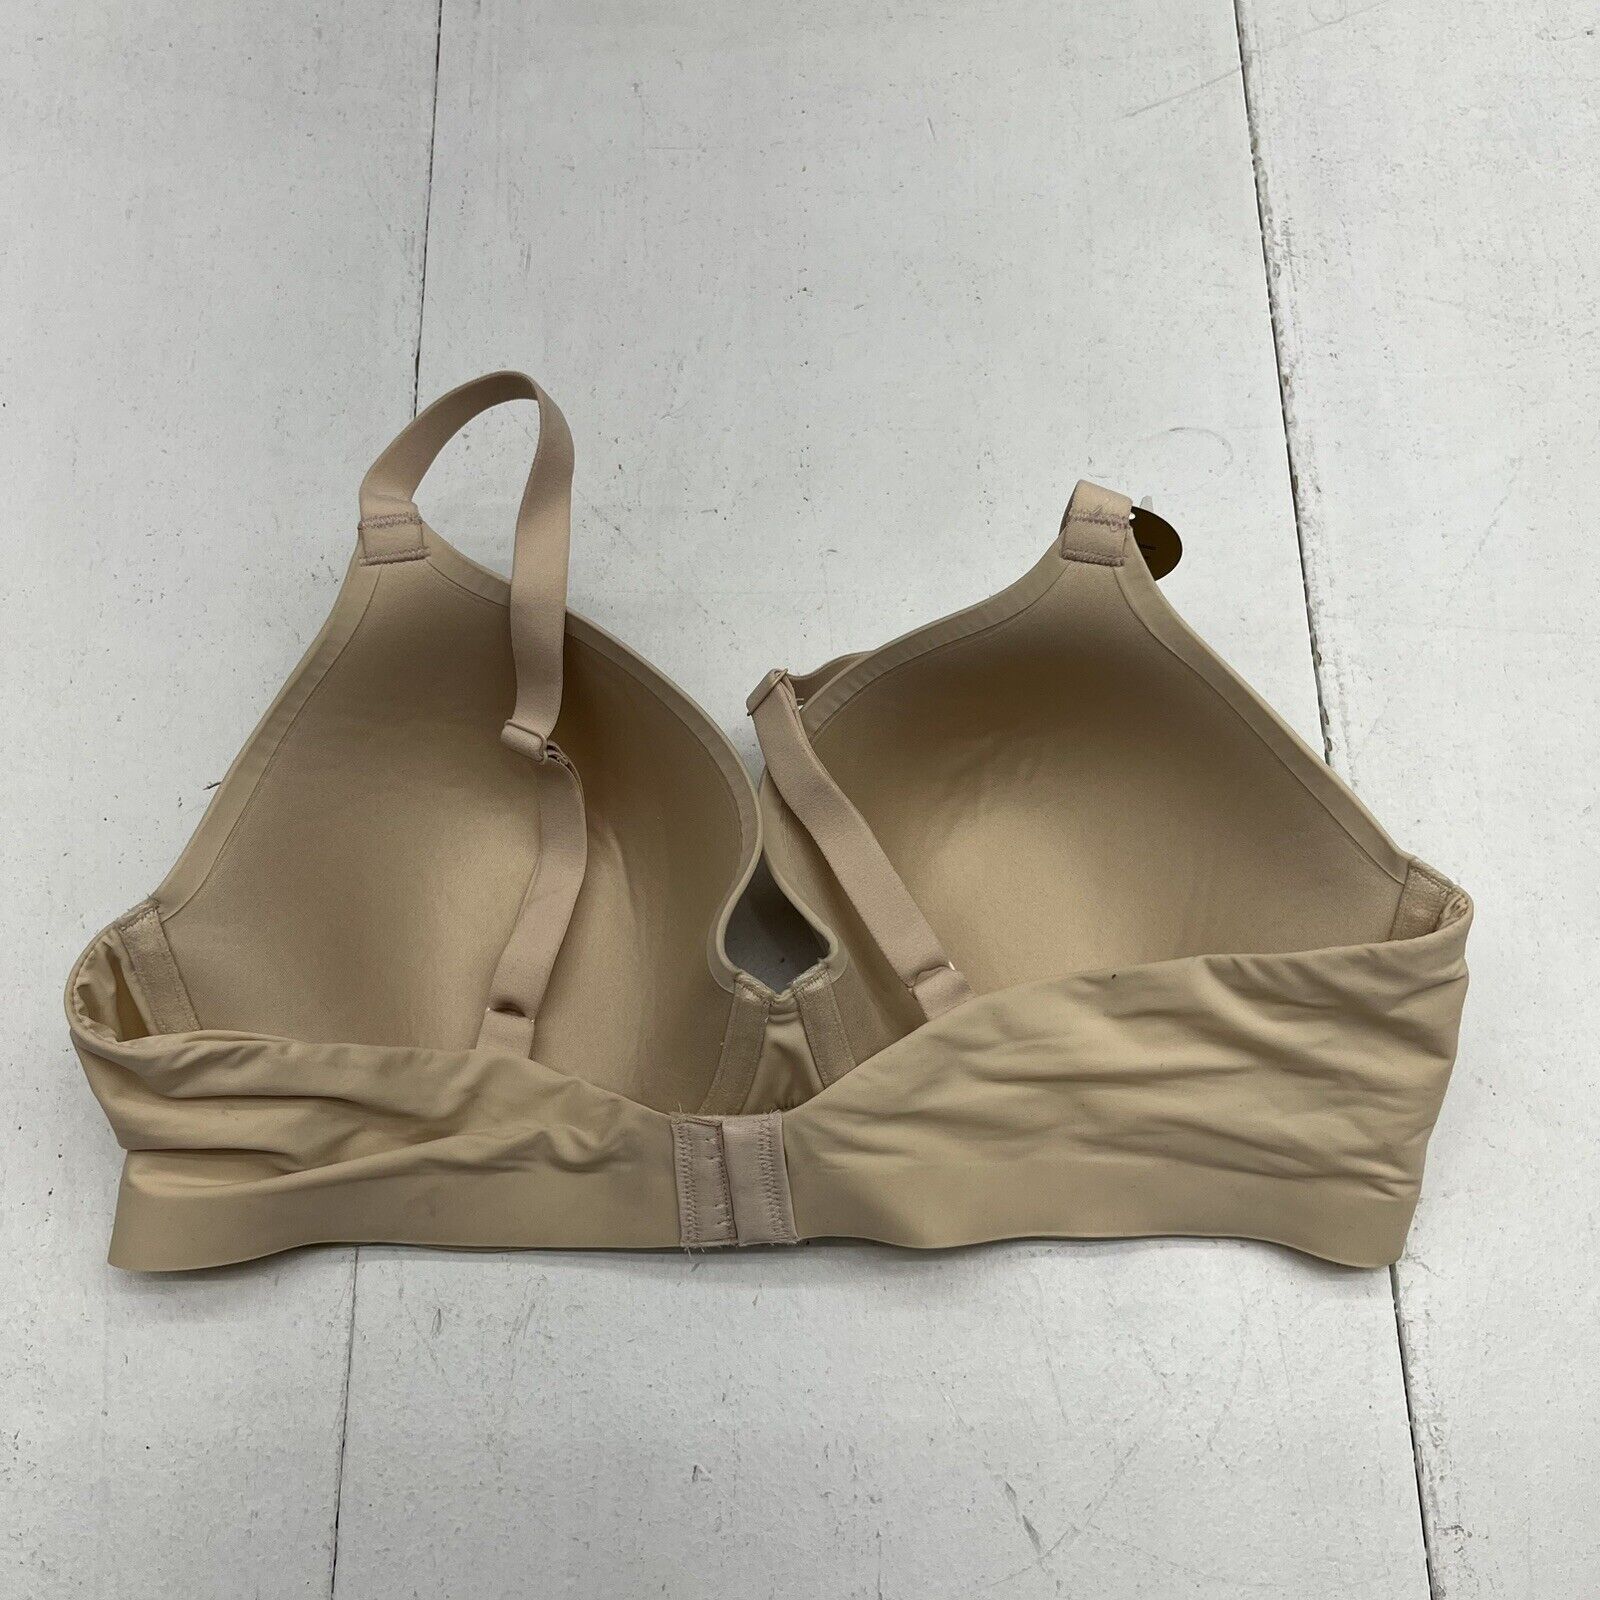 Wacoal 38D Size Bra in Kasaragod - Dealers, Manufacturers & Suppliers -  Justdial